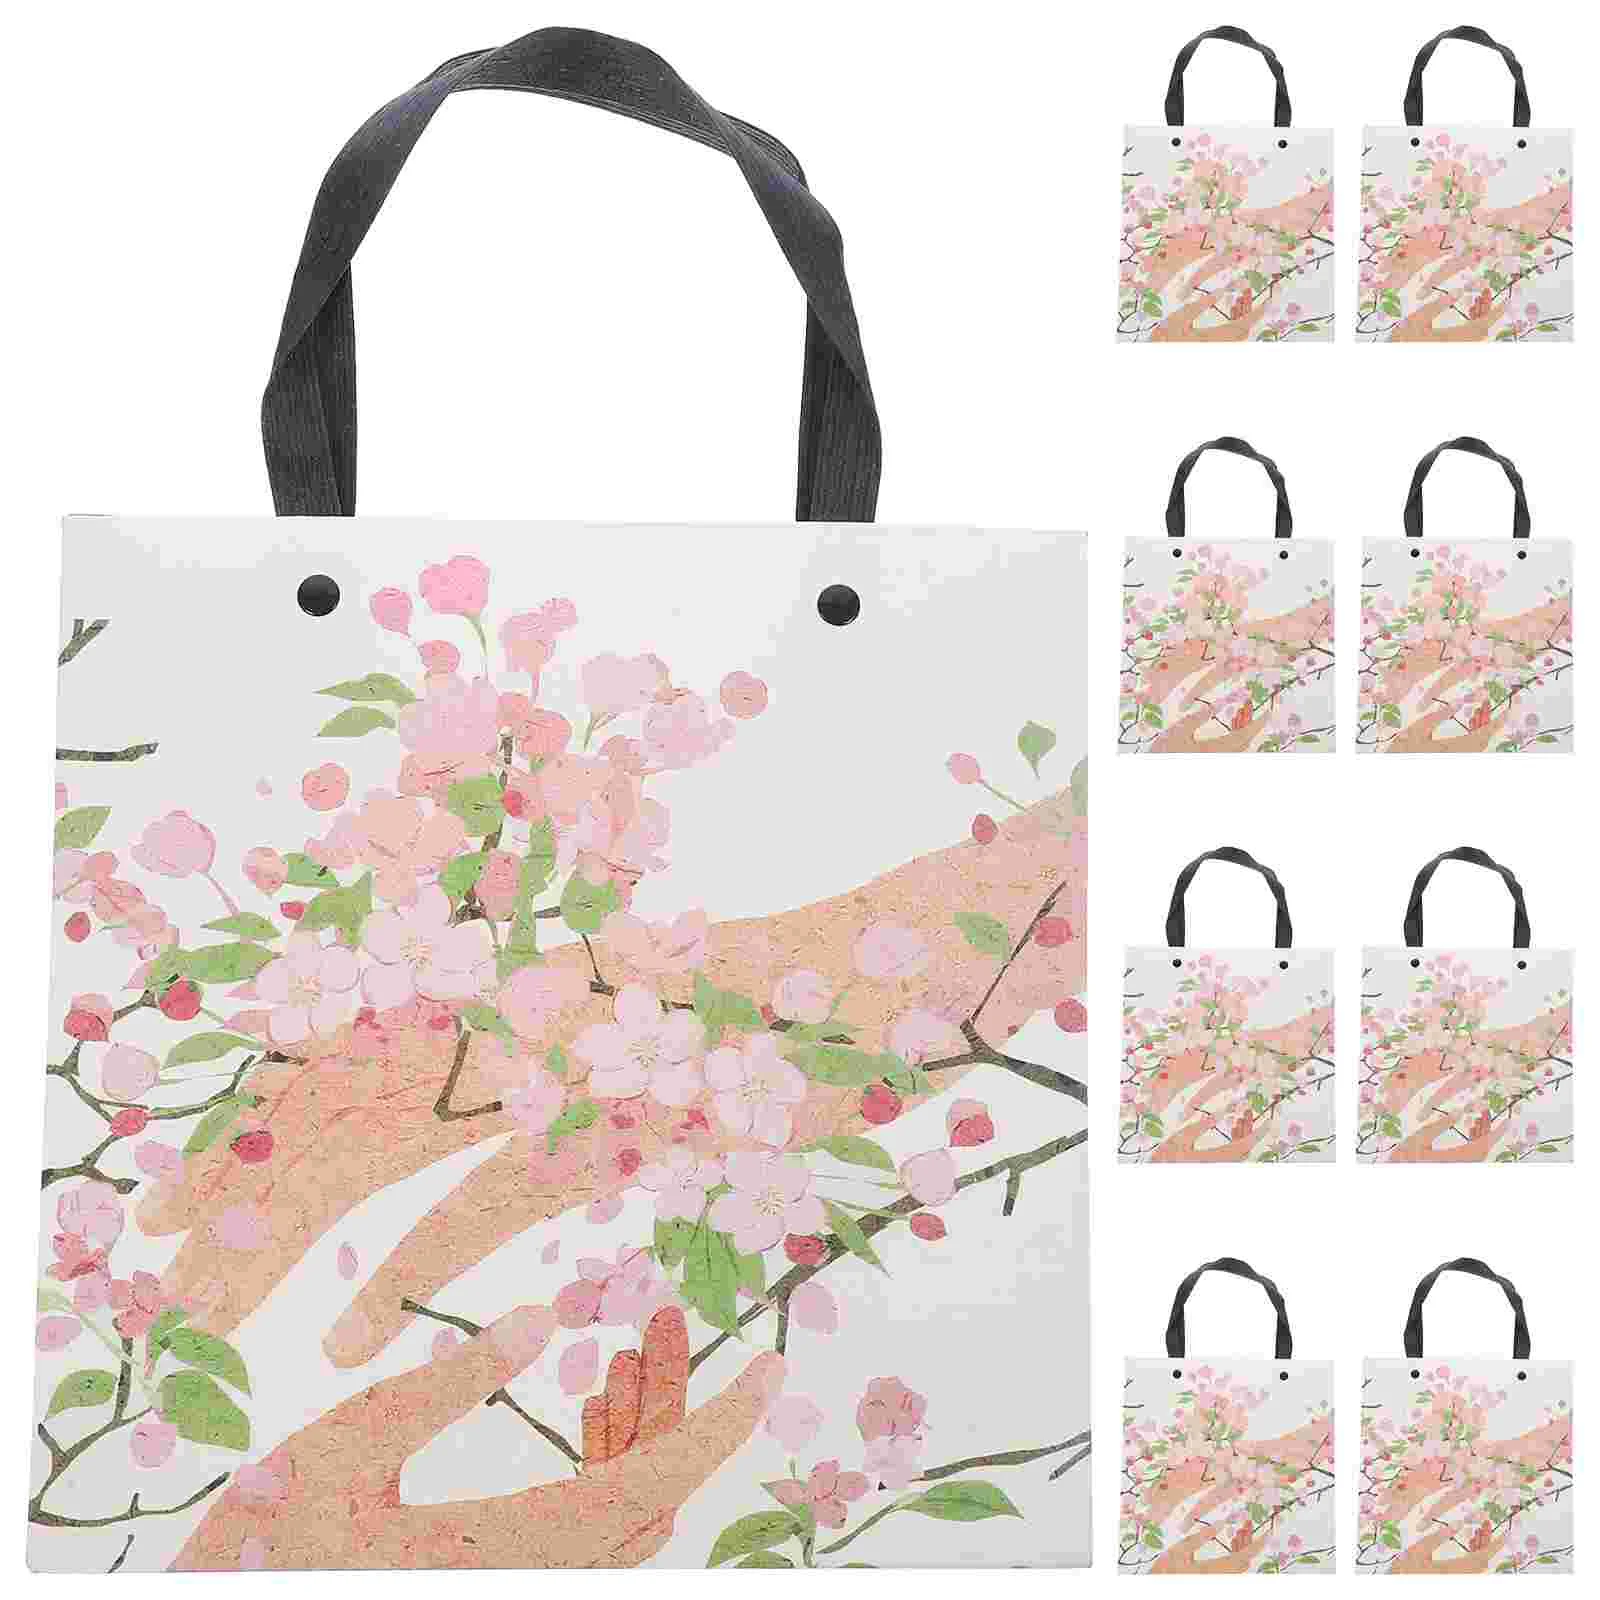 

10 Pcs Paper Gift Bags Flower Packing Candy Tote The Flowers Goodie Handles Treat Party Favor Birthday Presents